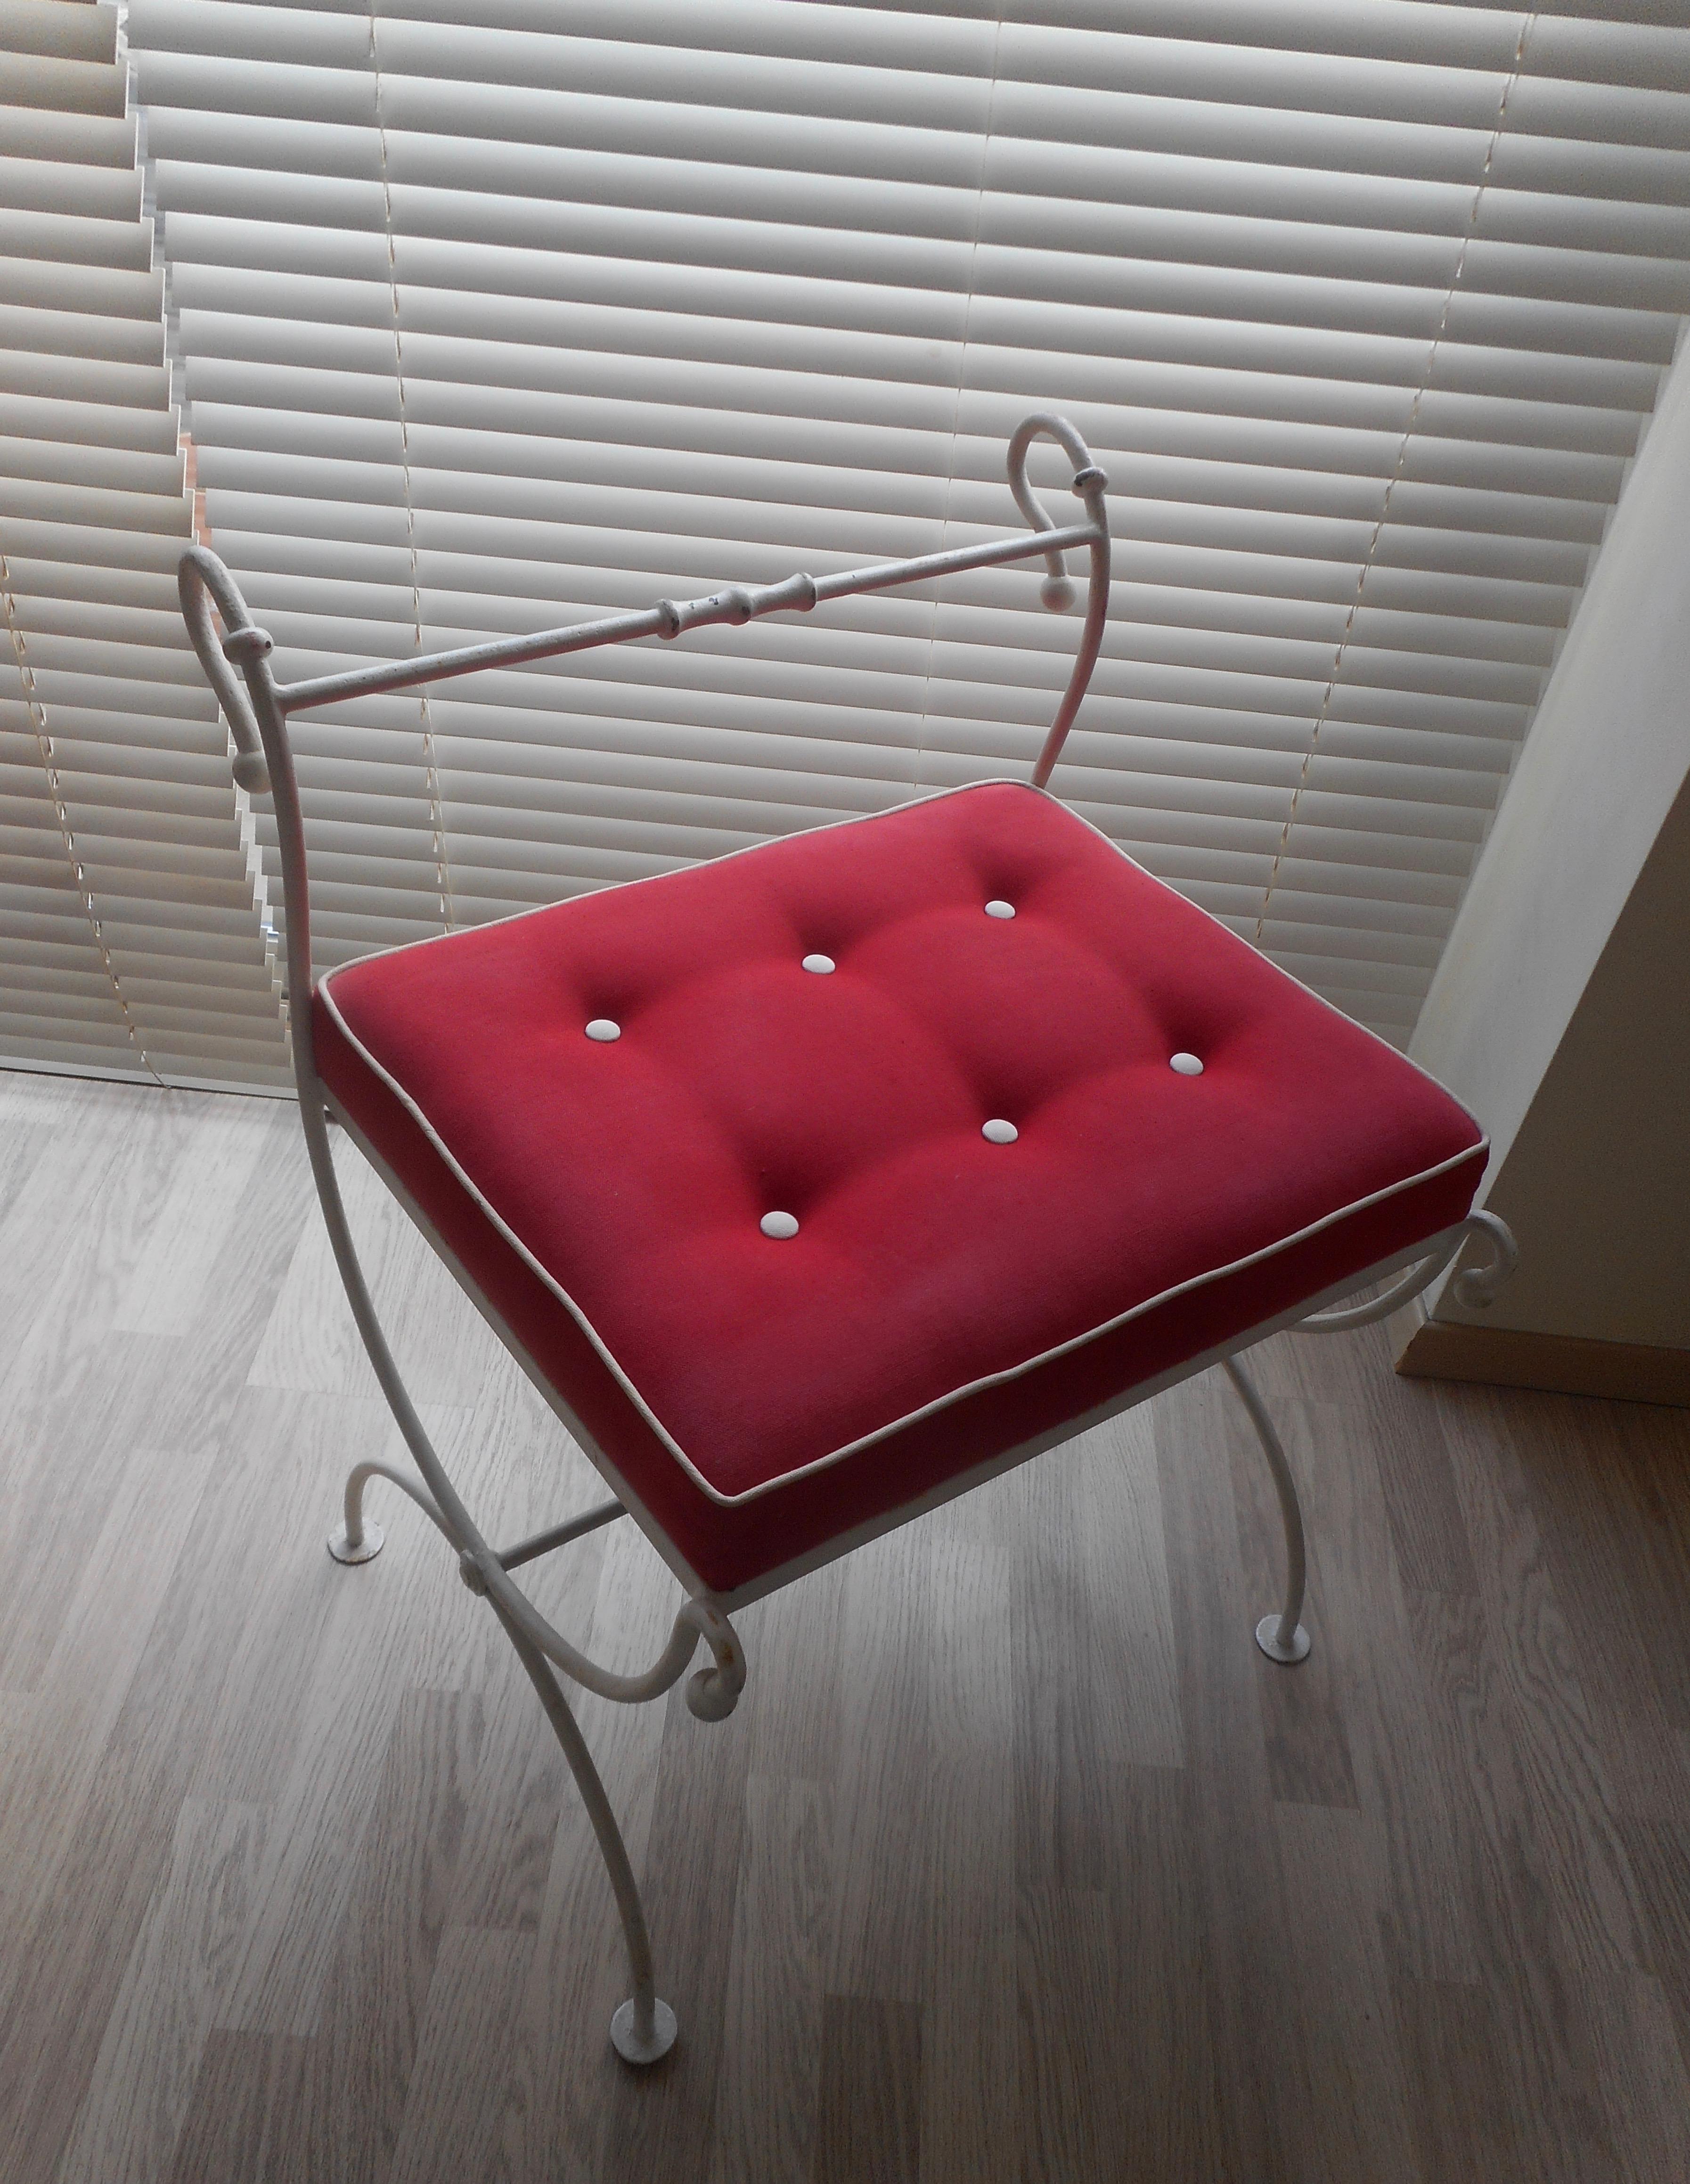 Elegant wrought iron bench by Maison Jansen.
Padded white an red seat.
By Maison Jansen, France, 1955.